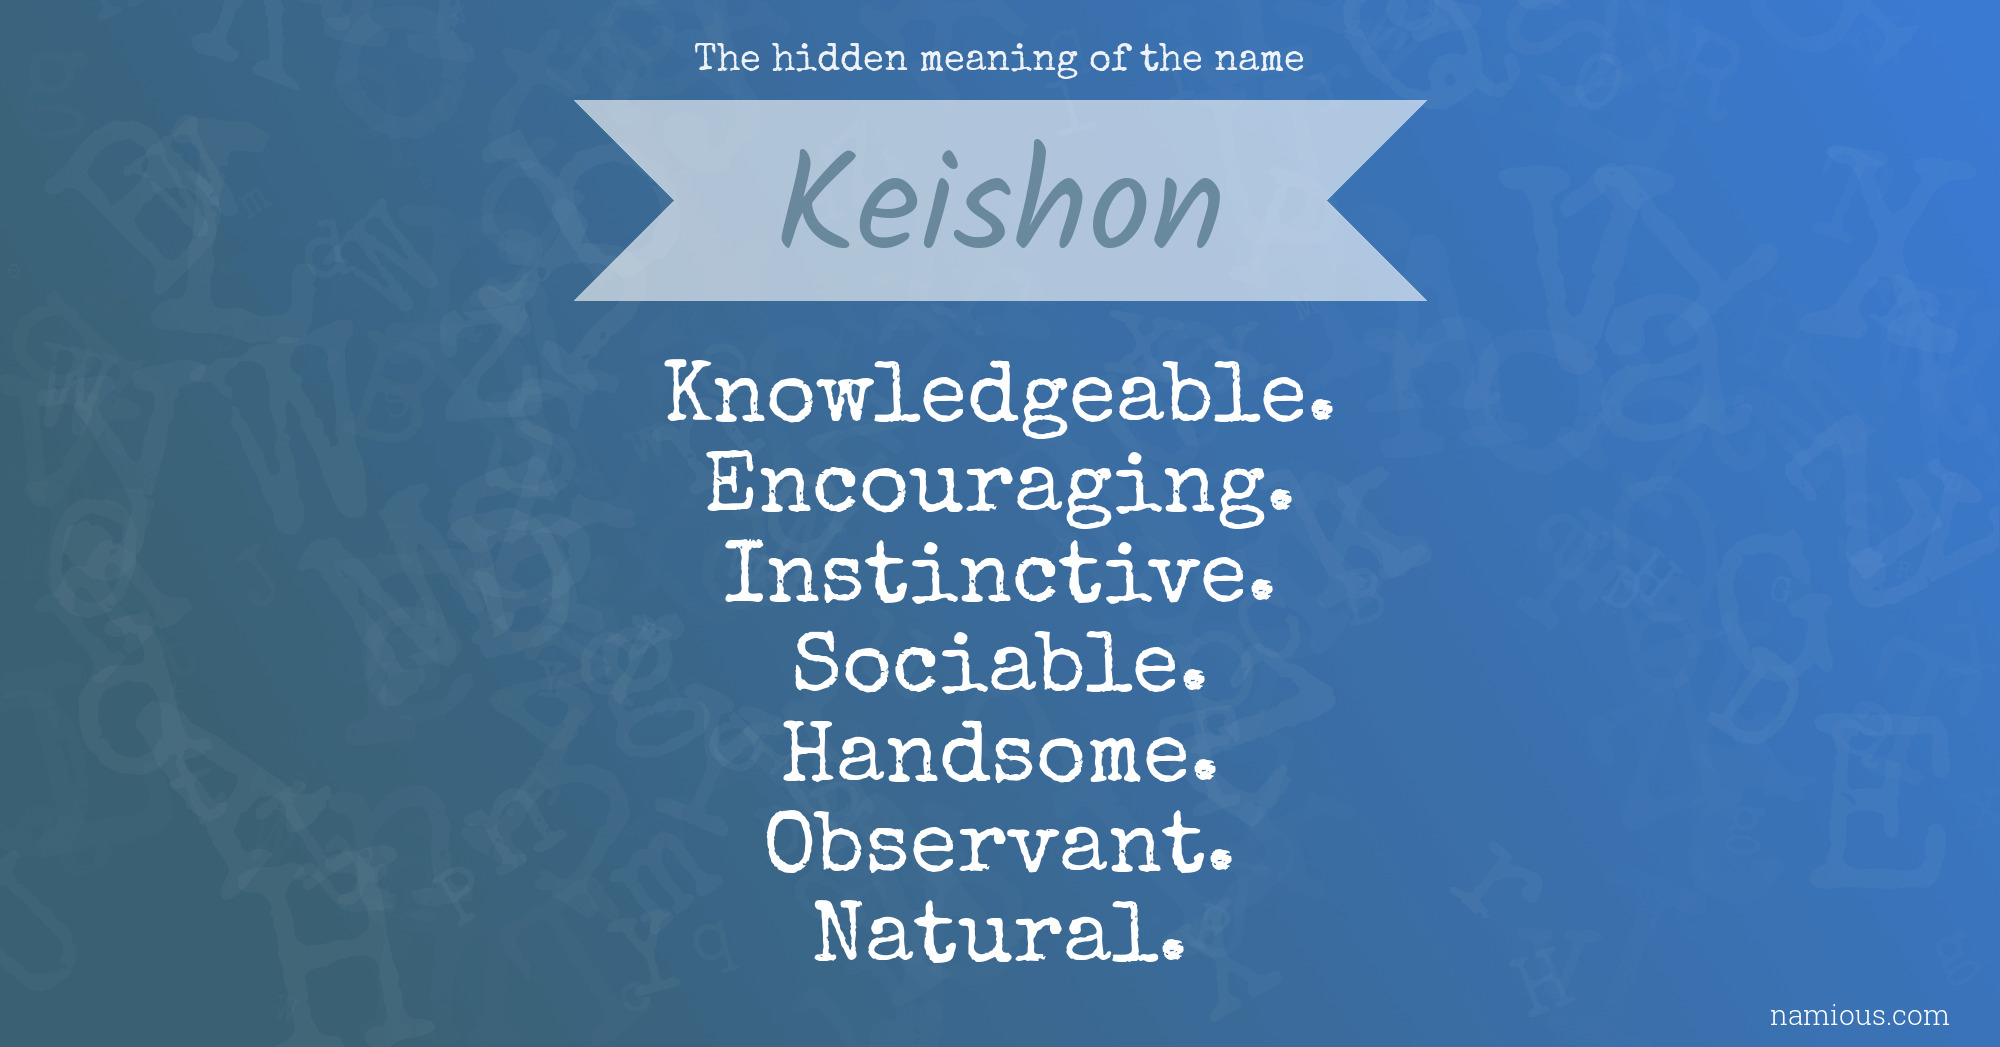 The hidden meaning of the name Keishon